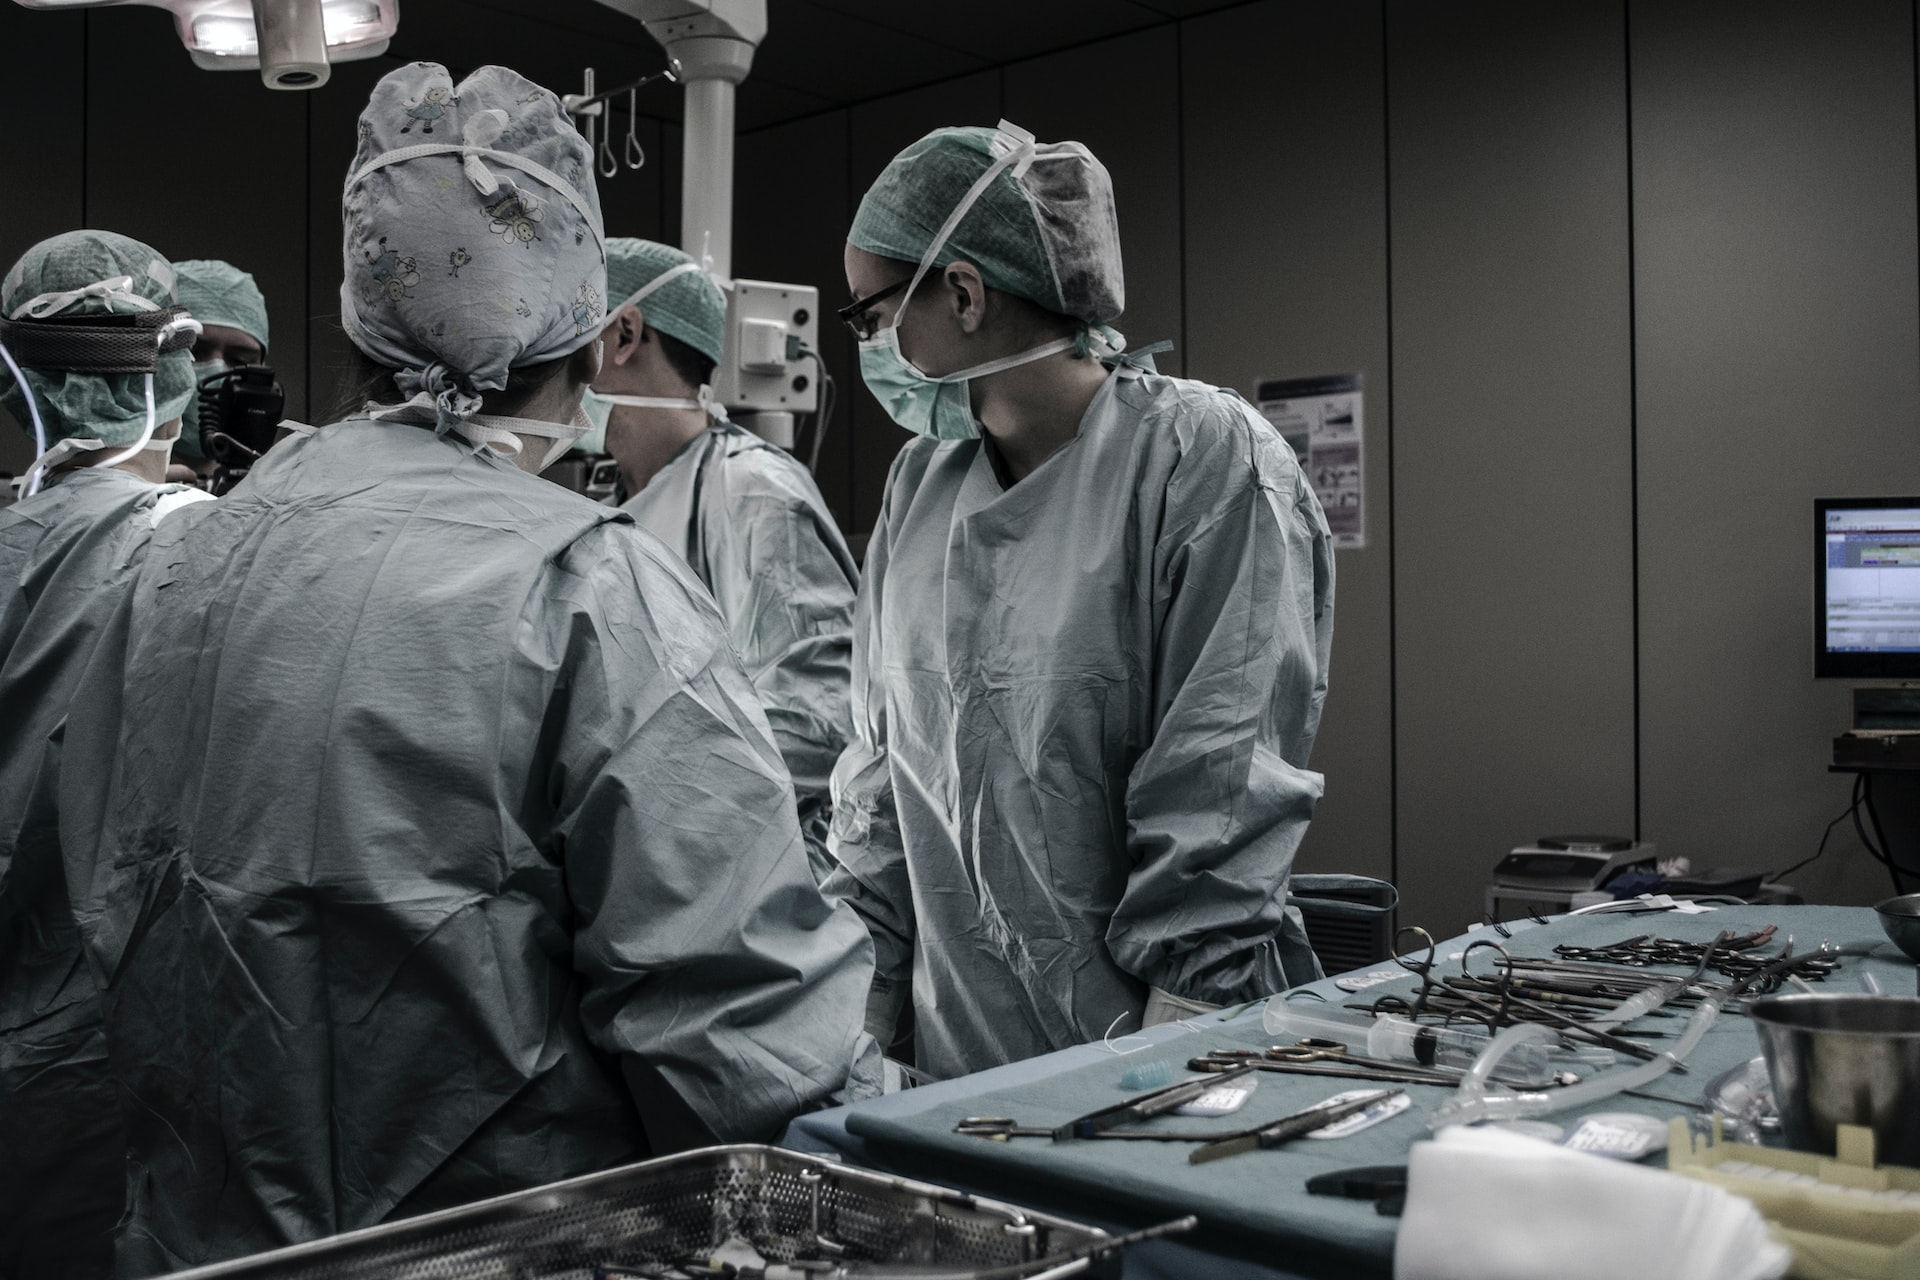 types of malpractice - surgeons in operating room